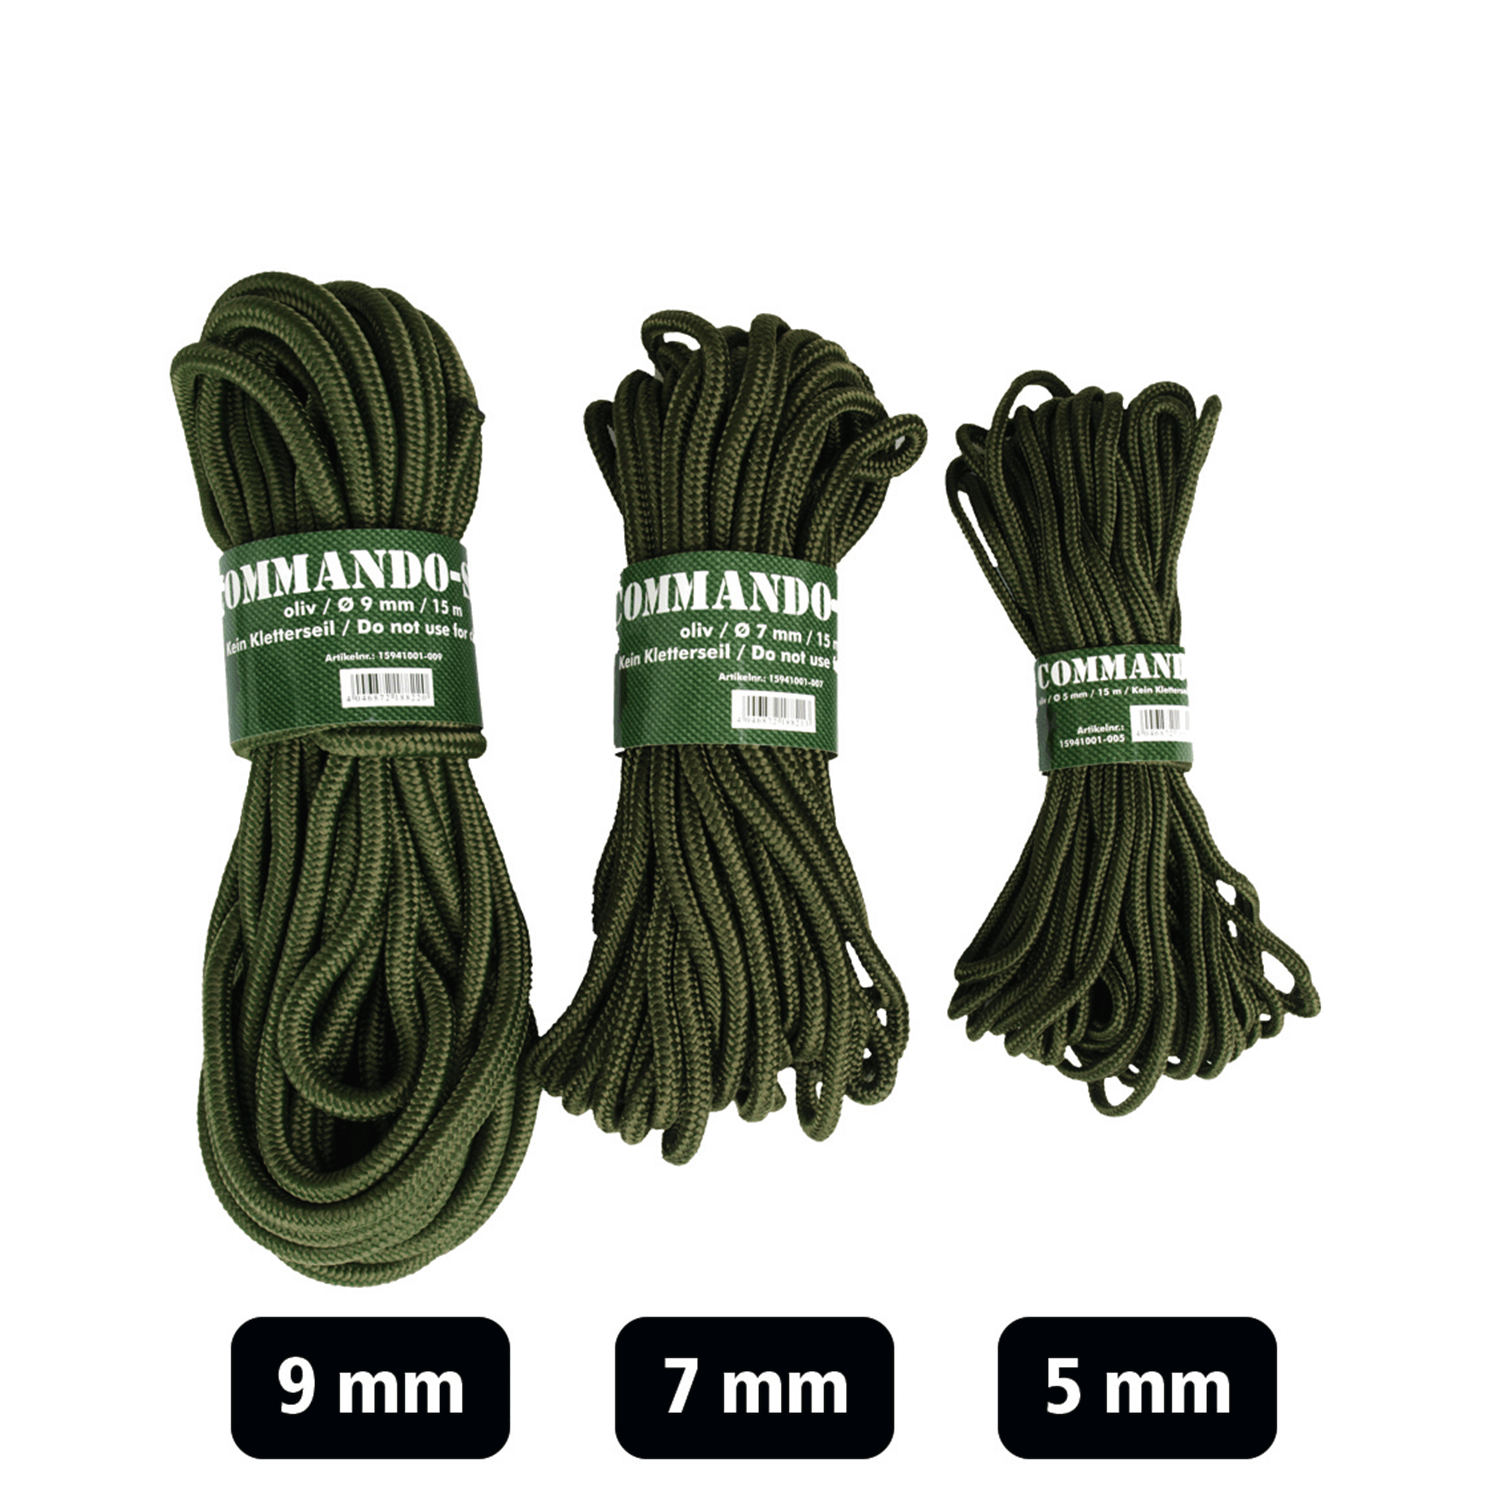 Mil-Tec paracord command (oliv) - Camouflage Nets